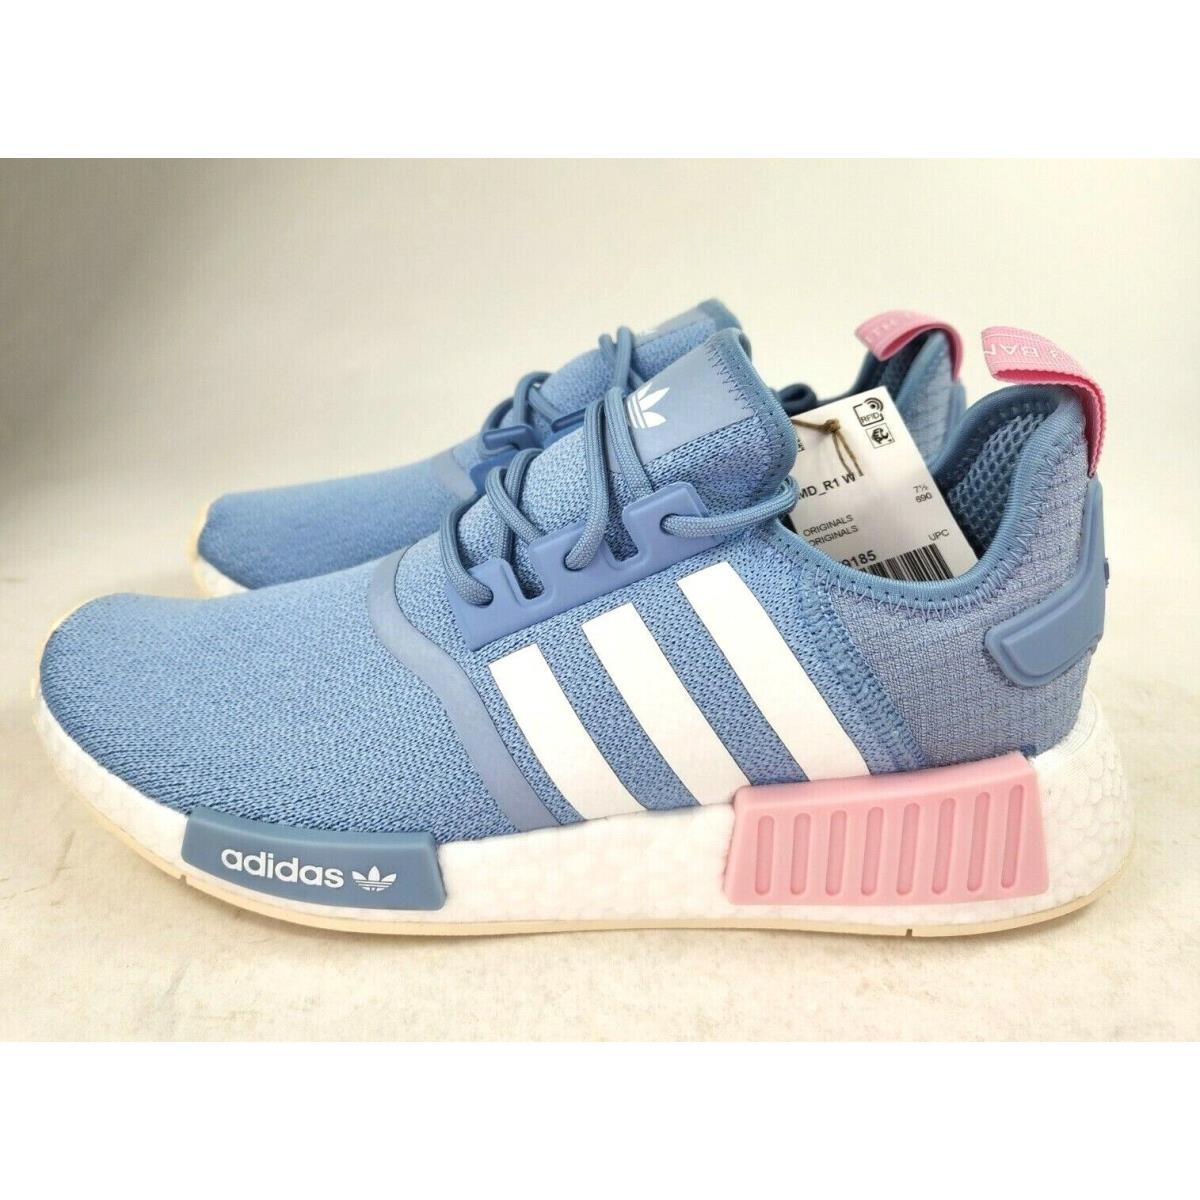 Adidas Nmd R1 Boost Sky Blue Pink White Shoes Women`s Sizes GV9185 | 692740687841 - Adidas shoes NMD - Blue | SporTipTop